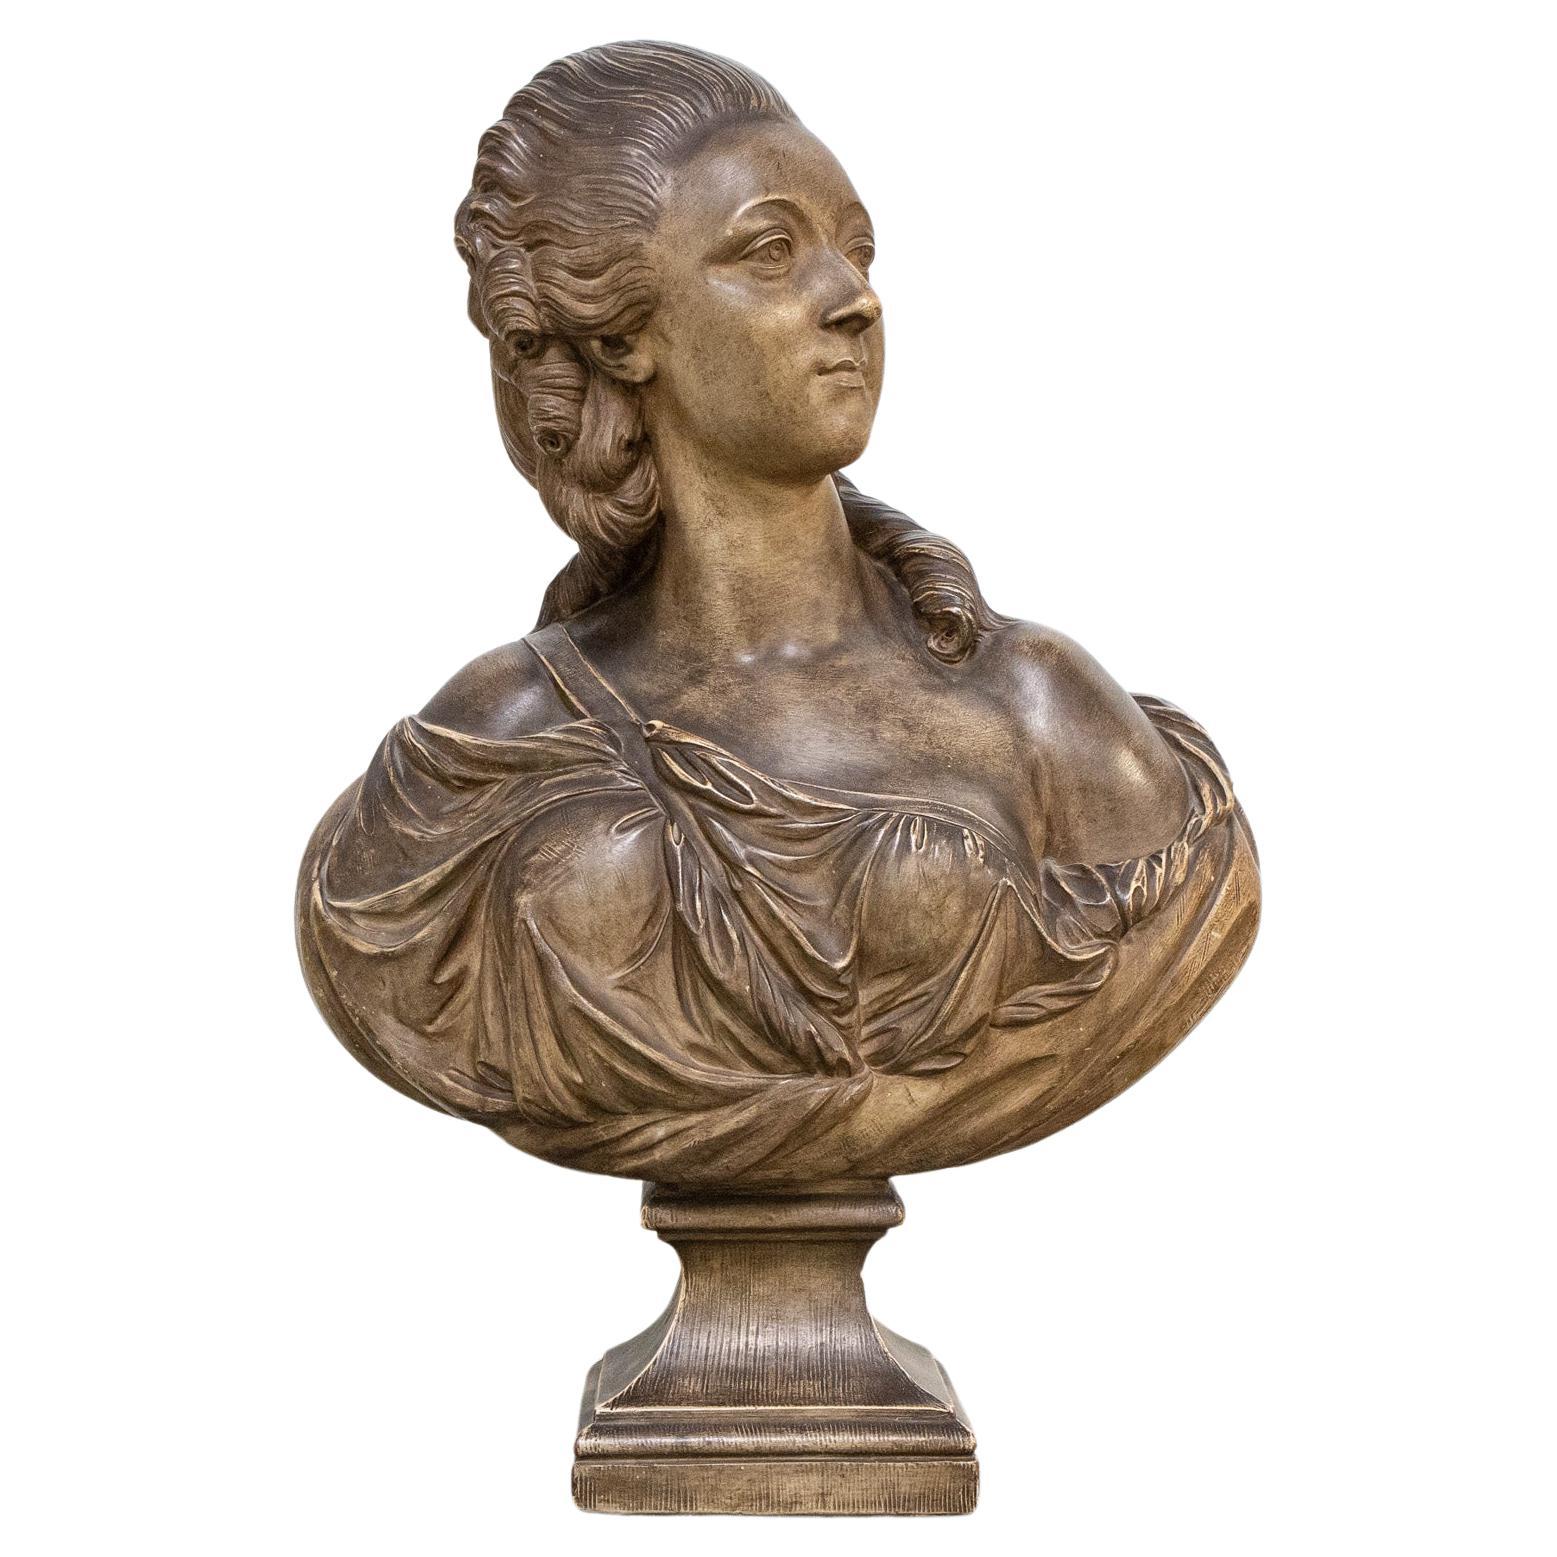 Large Painted Terracotta Bust of Madame Du Barry After Augustin Pajou